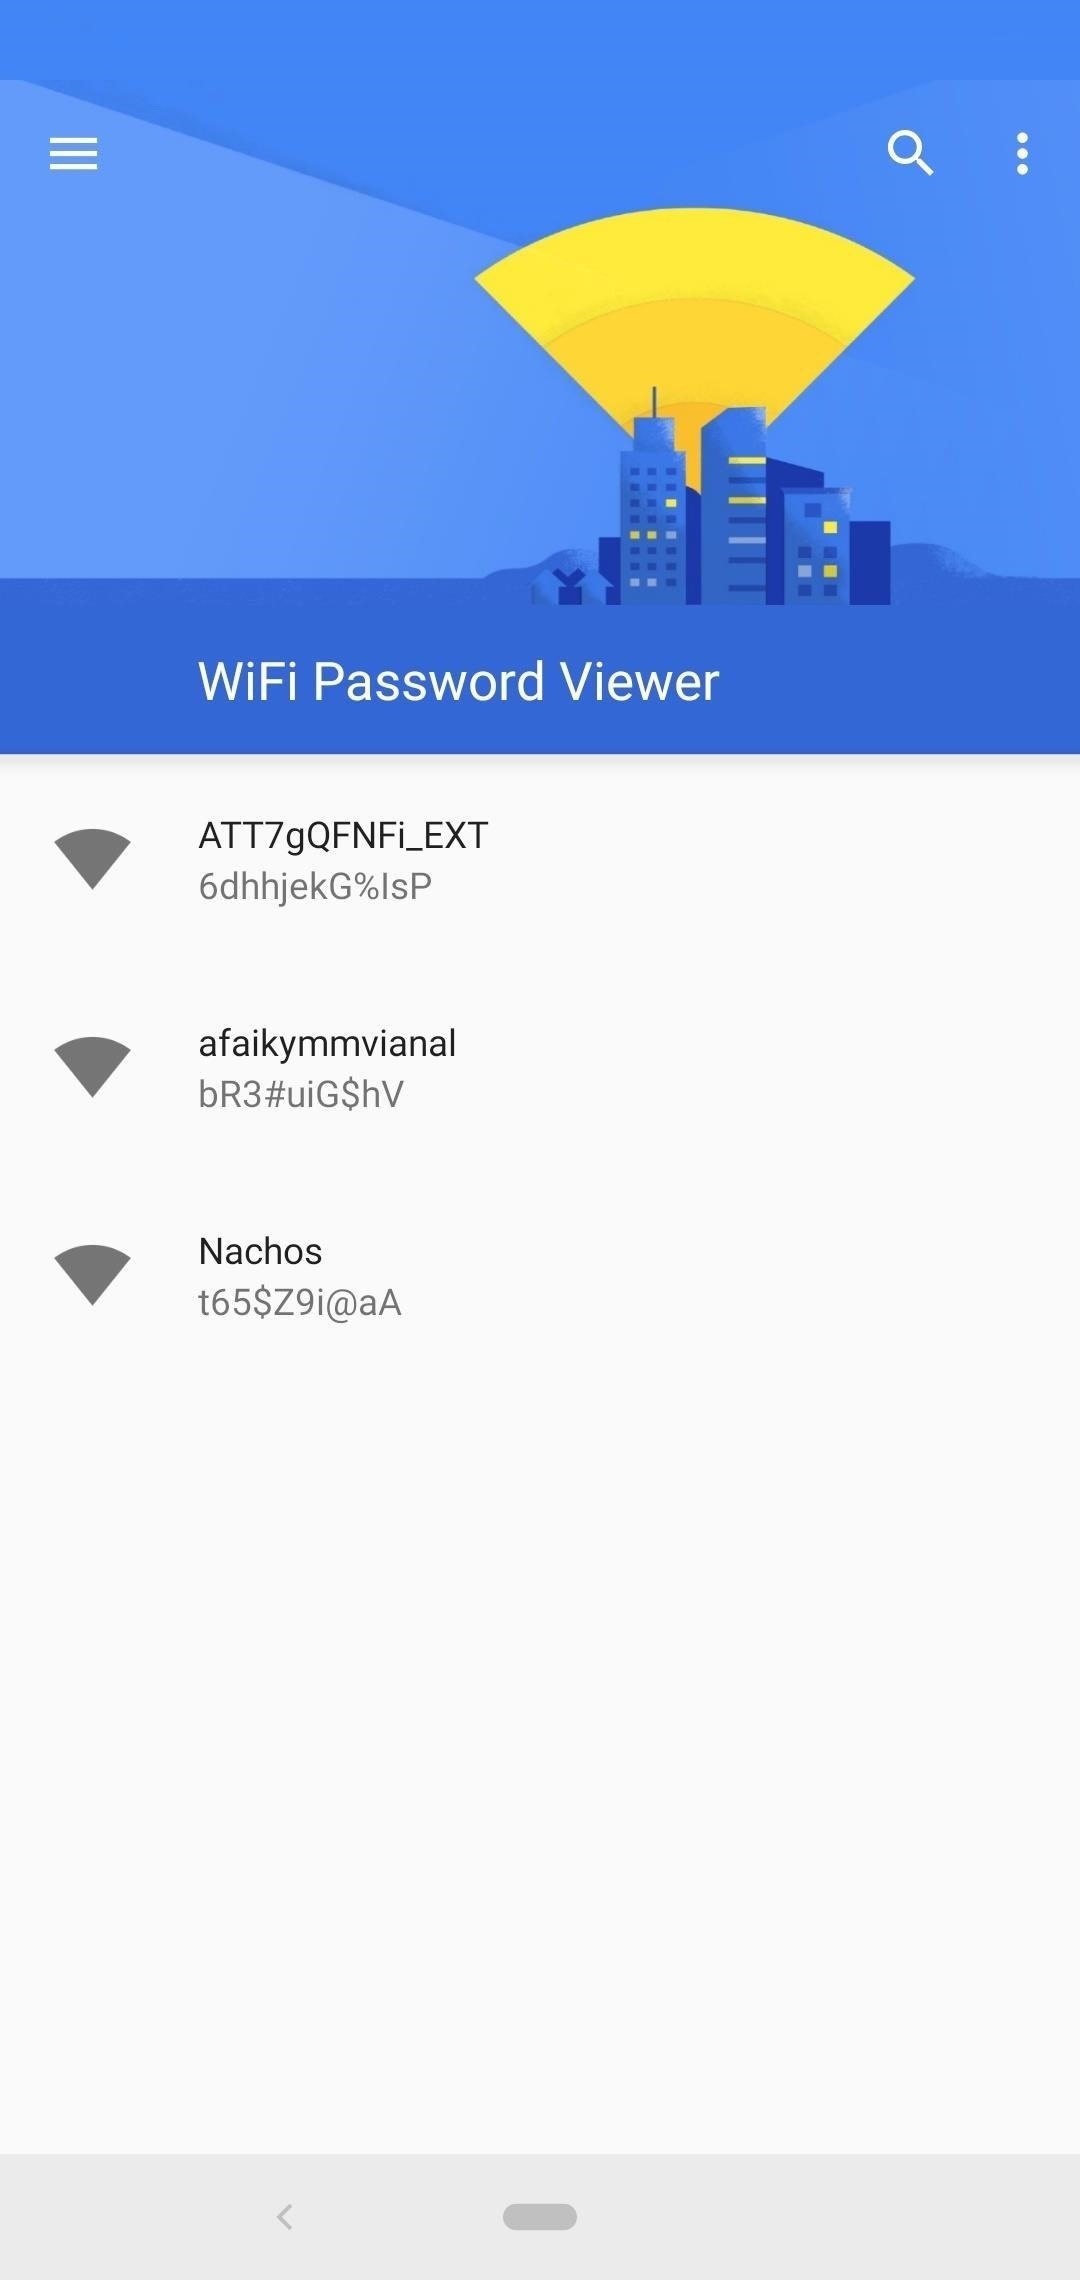 How to See Passwords for Wi-Fi Networks You've Connected Your Android Device To